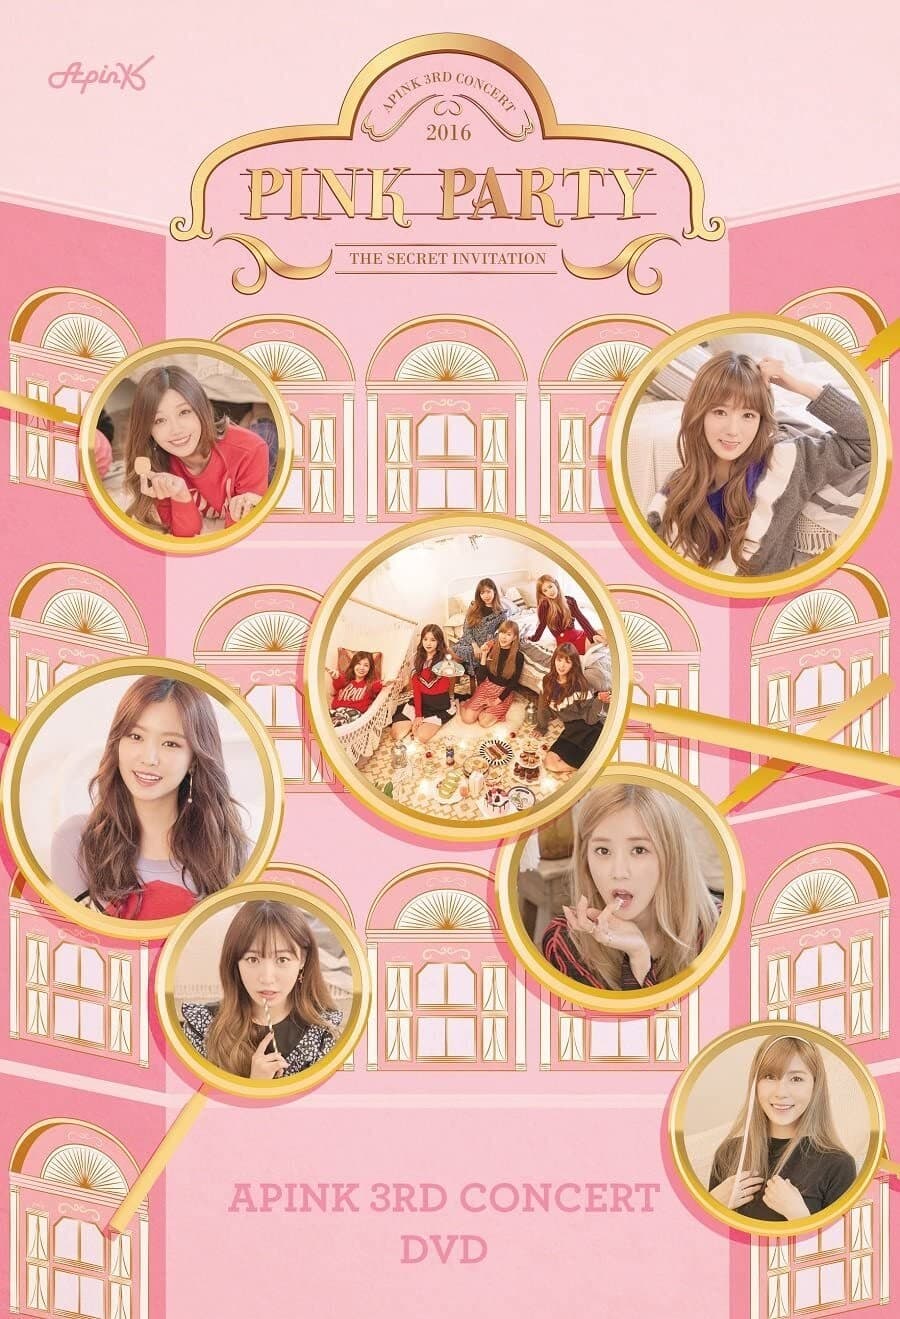 Apink 3rd Concert "Pink Party"